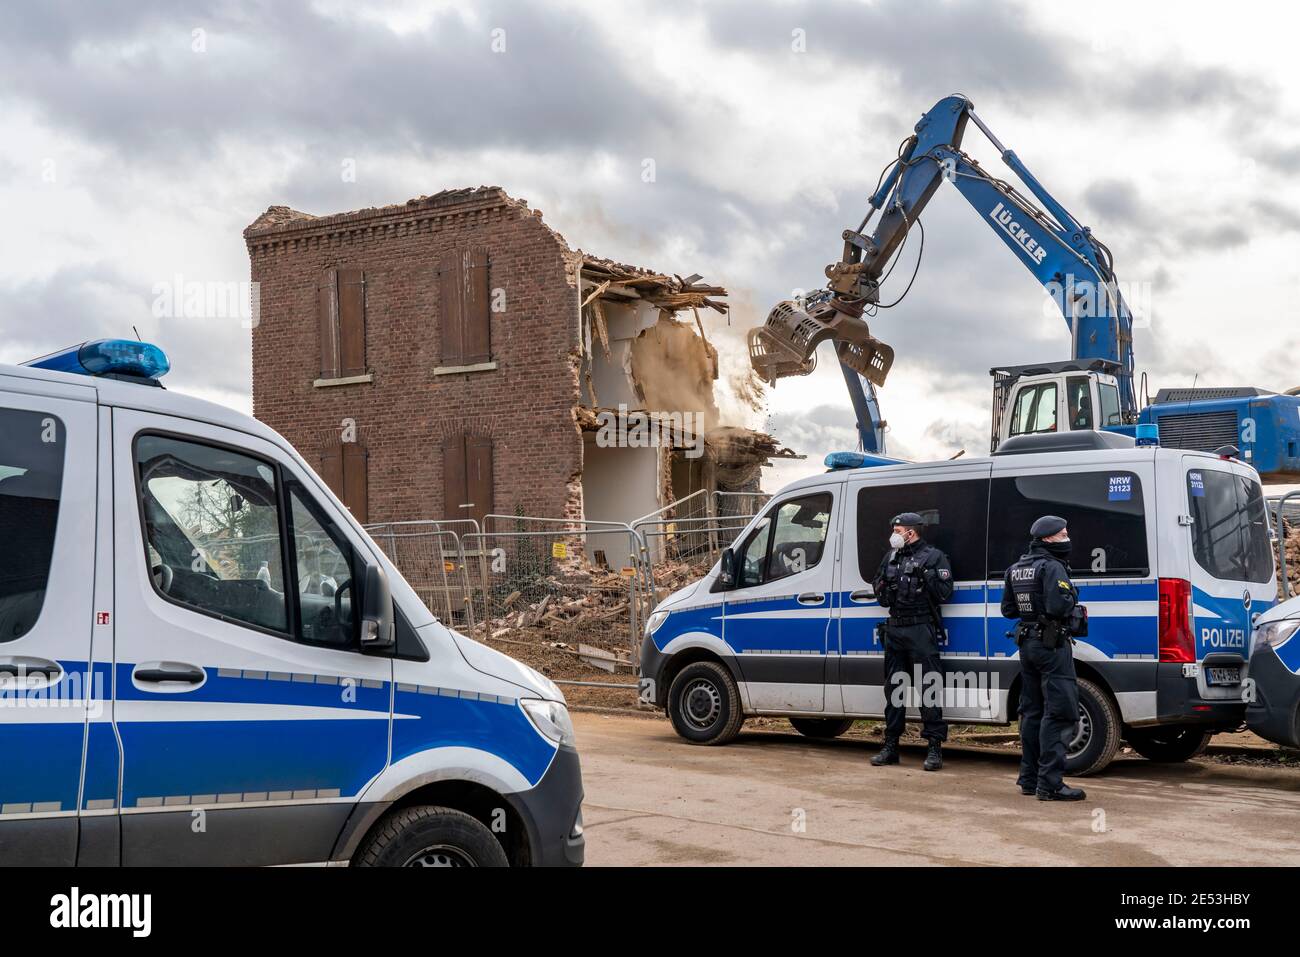 Demolition of the village of Lützerath near Erkelenz by the energy company RWE to make way for the open-cast lignite mine Garzweiler II, protests by r Stock Photo